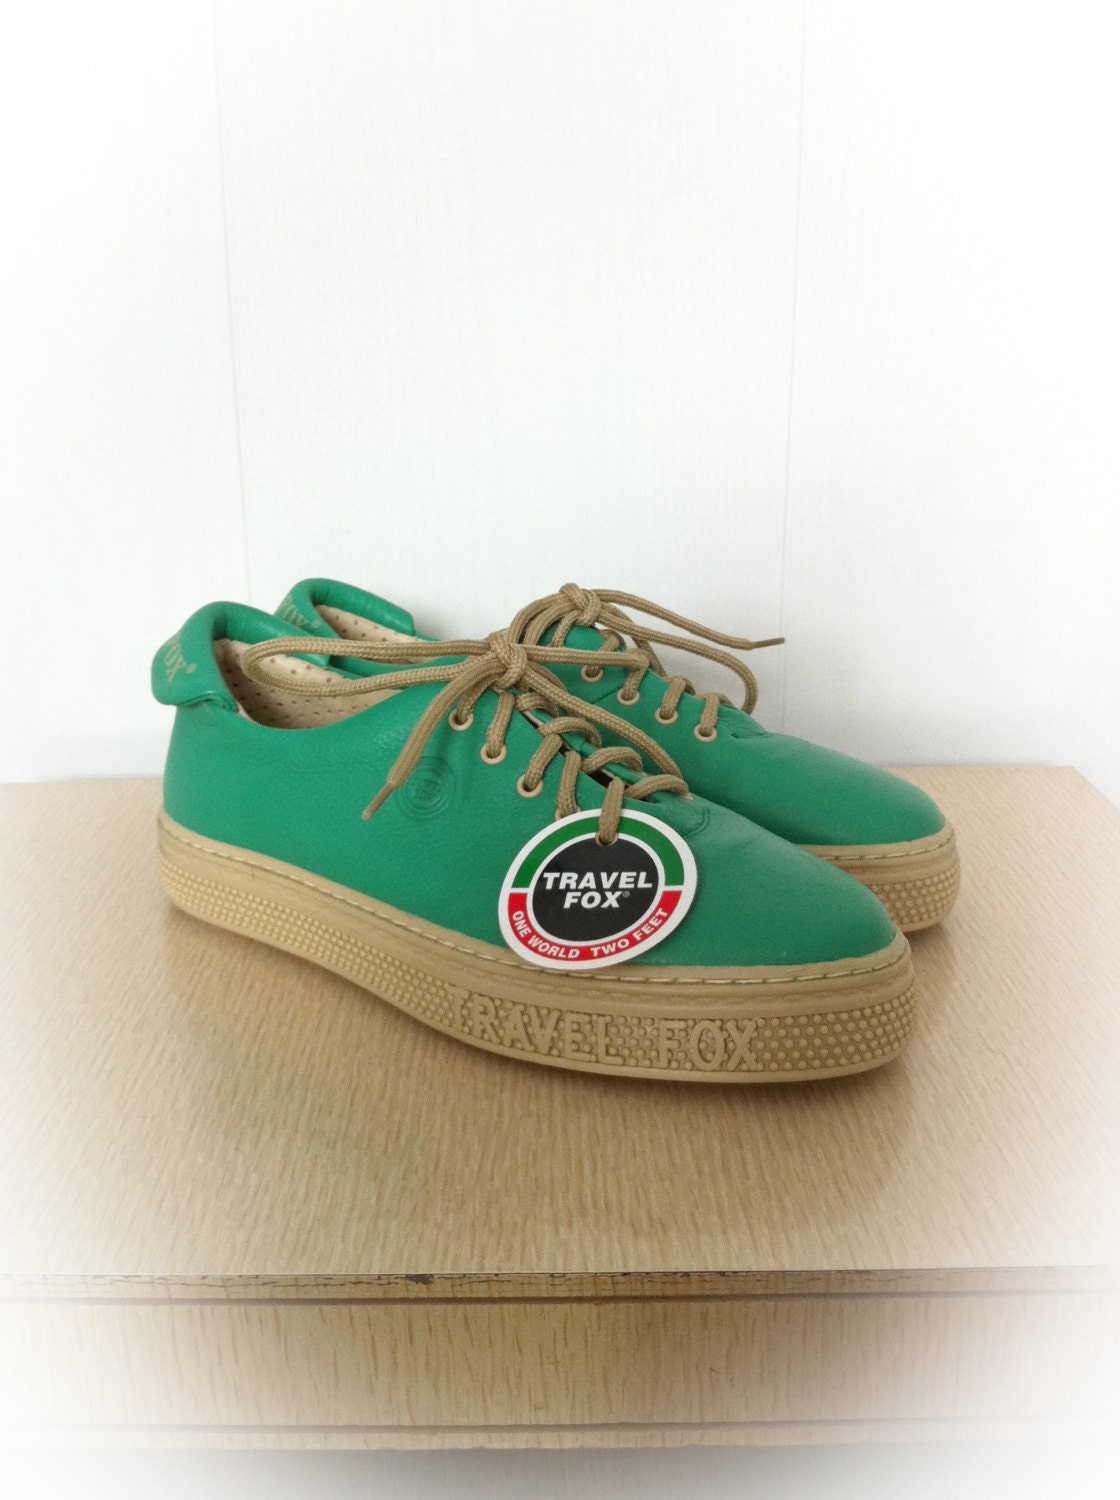 Vintage 1980s Travel Fox Shoes Green Sneakers Deadstock Euro